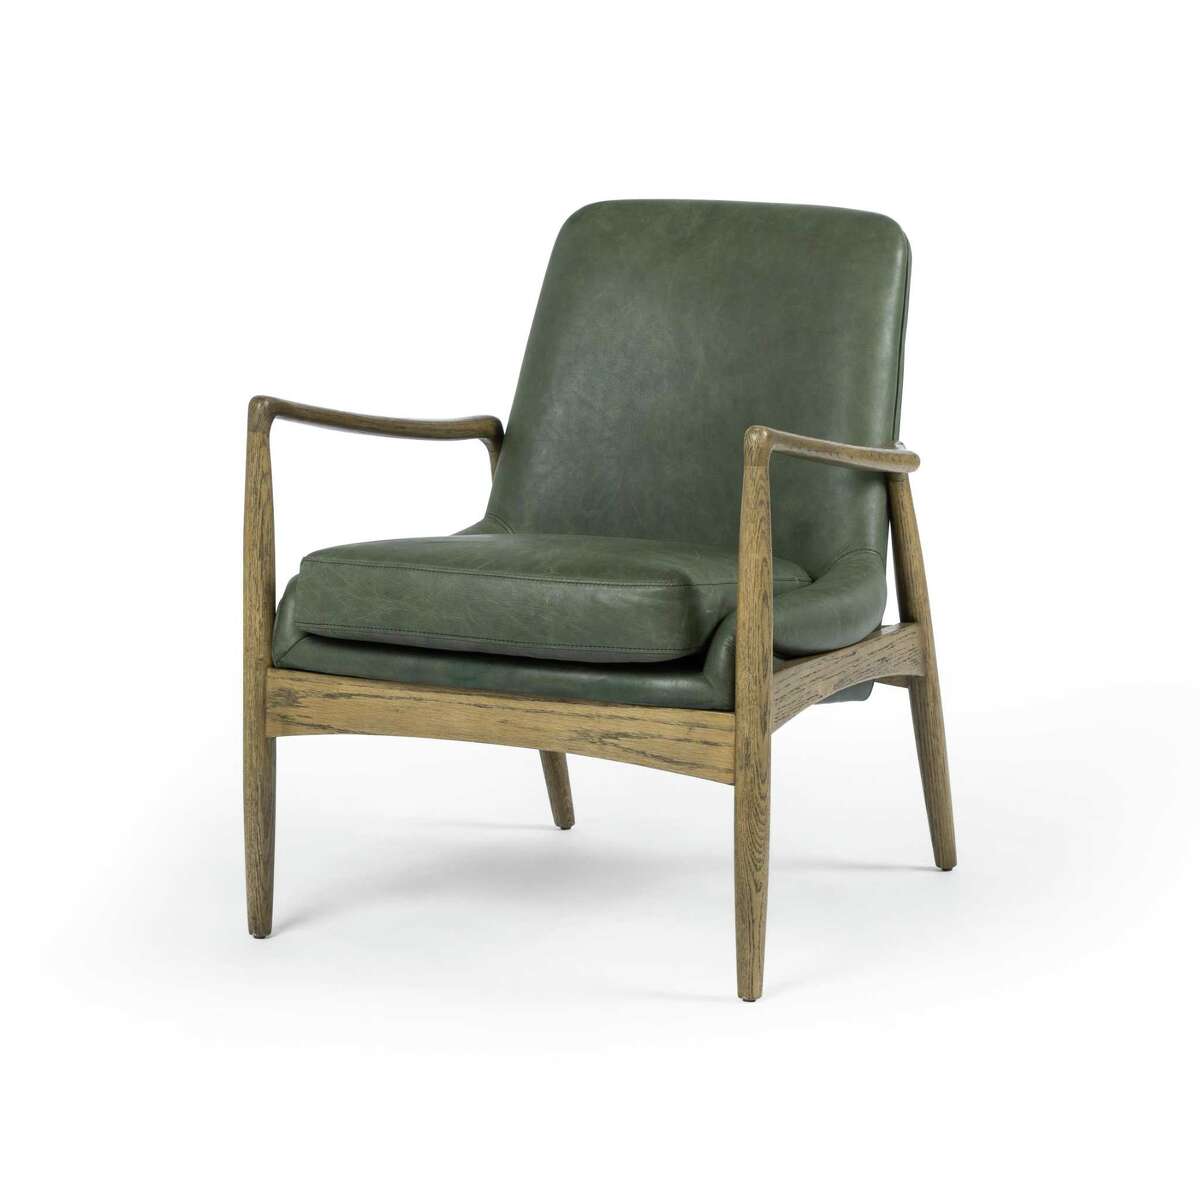 Four Hands’ Braden chair is upholstered in muted green leather. It was part of new collections shown at the Fall 2019 High Point Market.